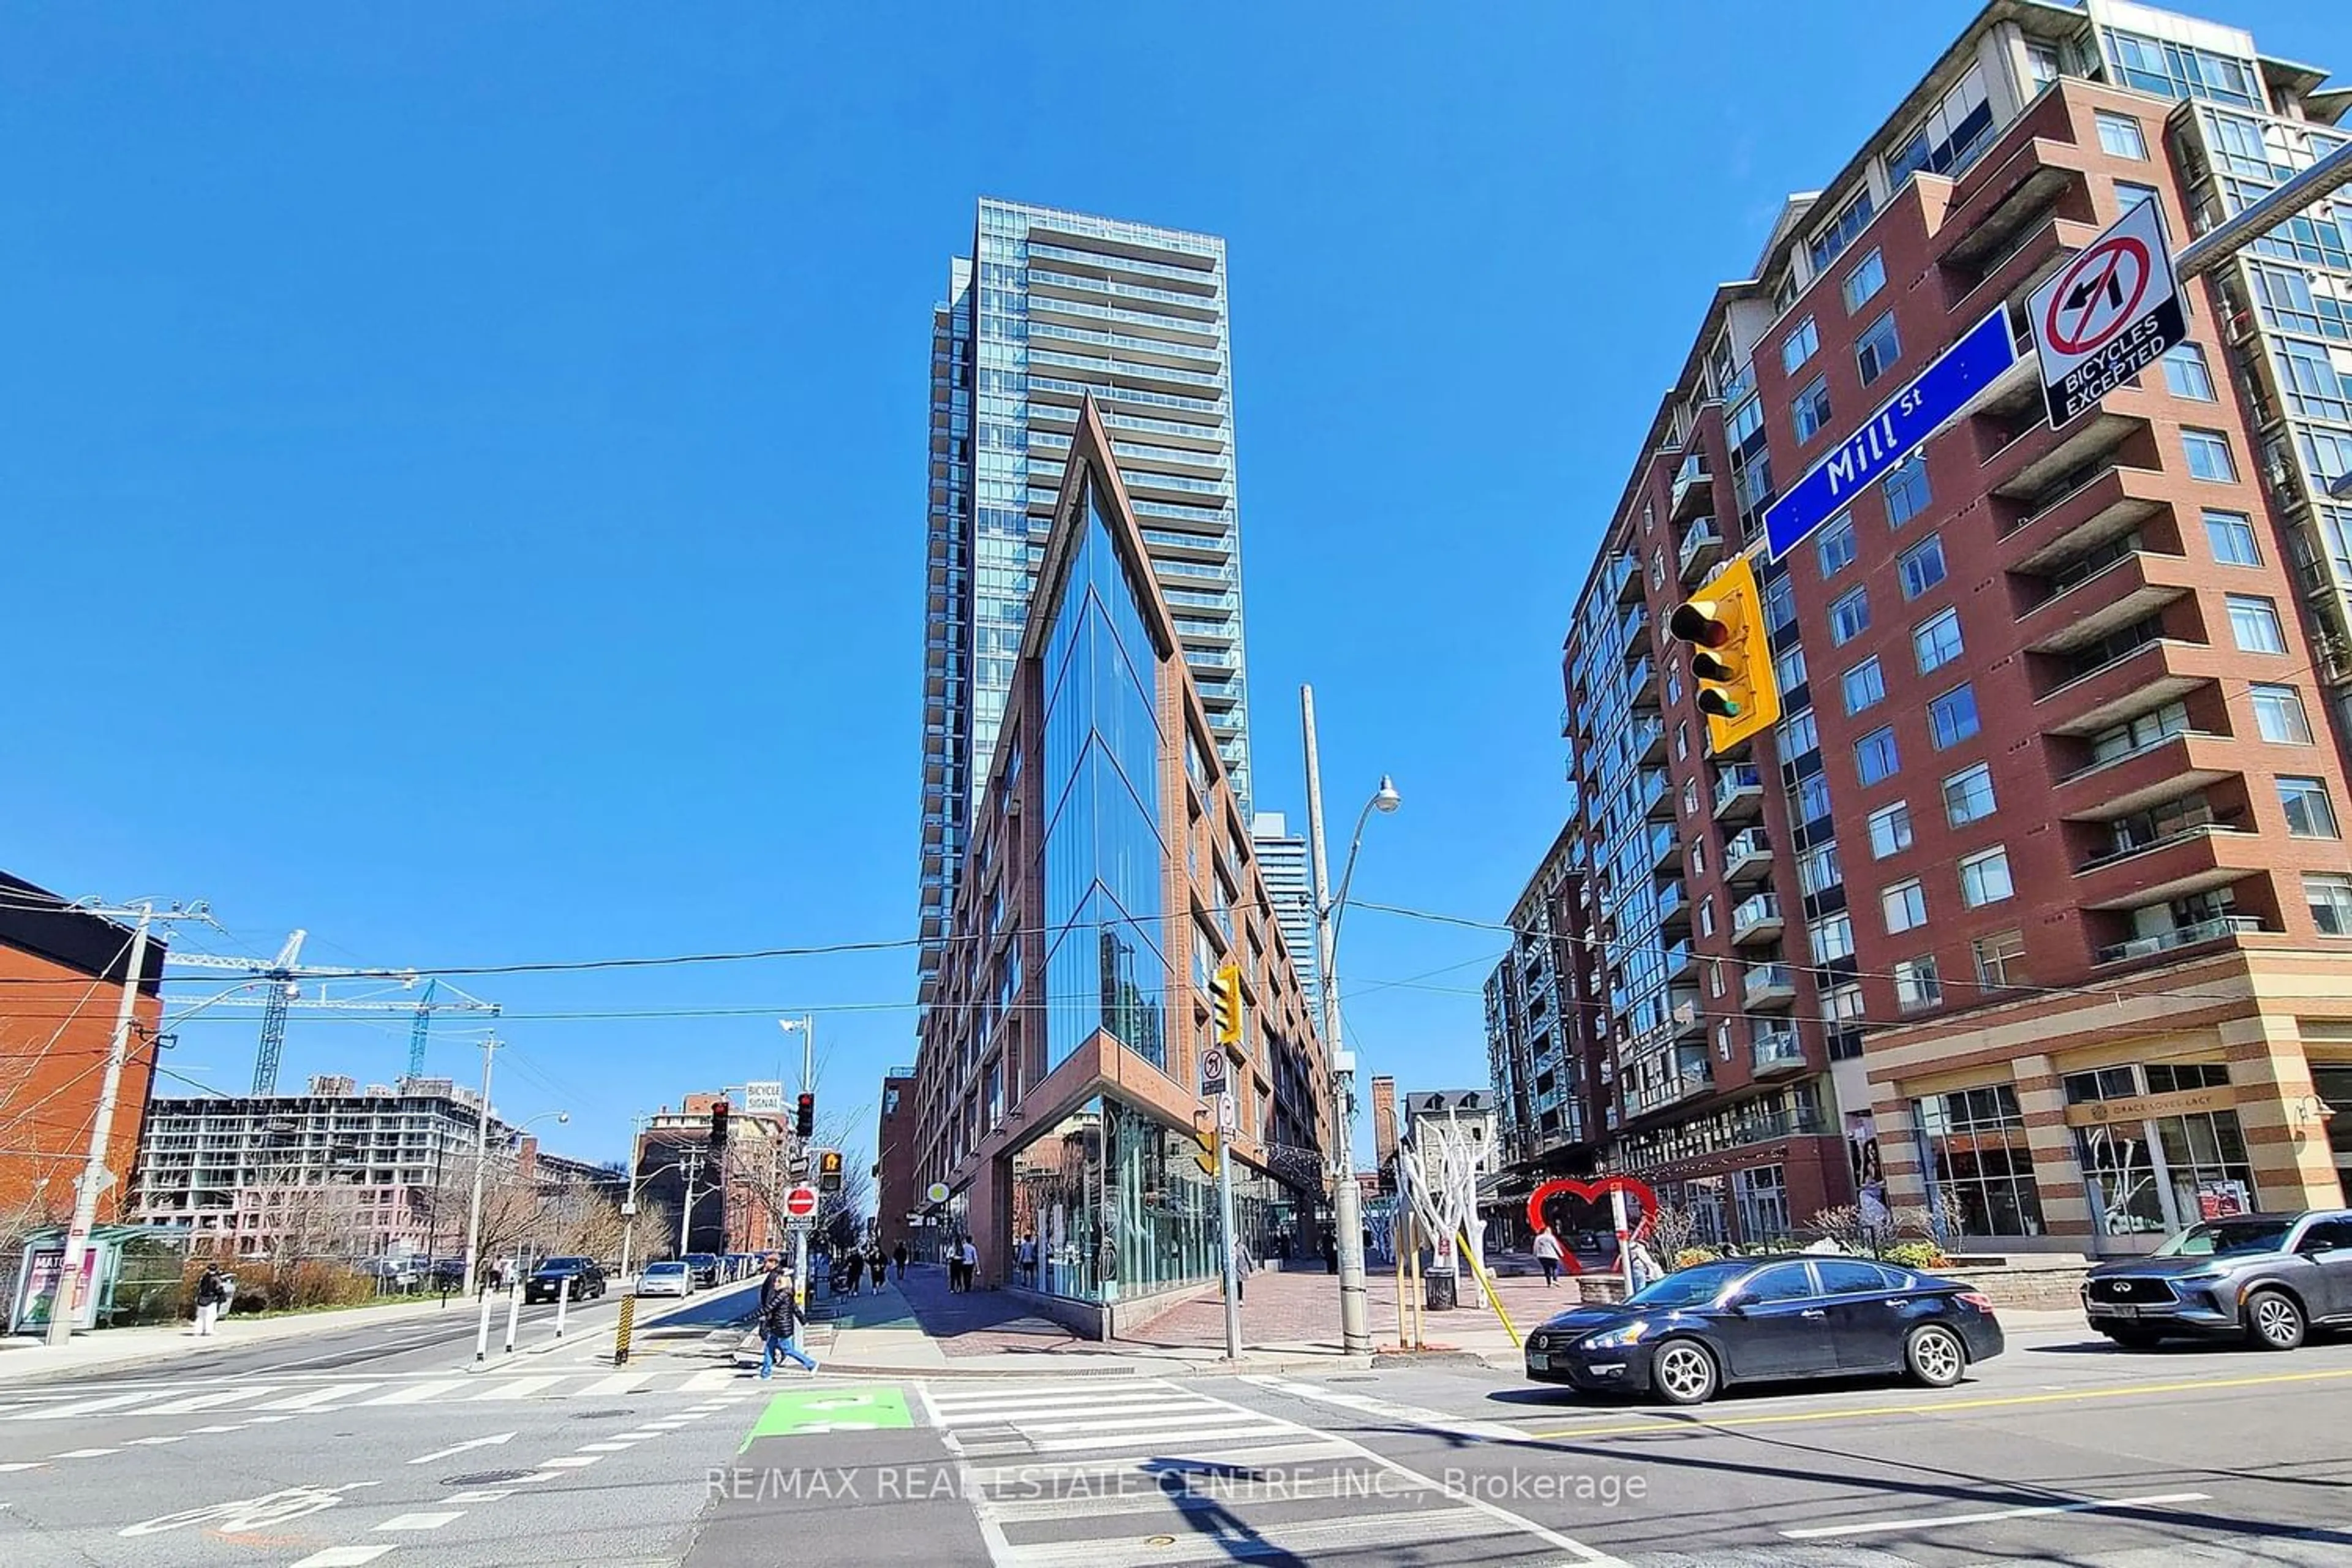 Street view for 33 Mill St #312, Toronto Ontario M5A 3N3